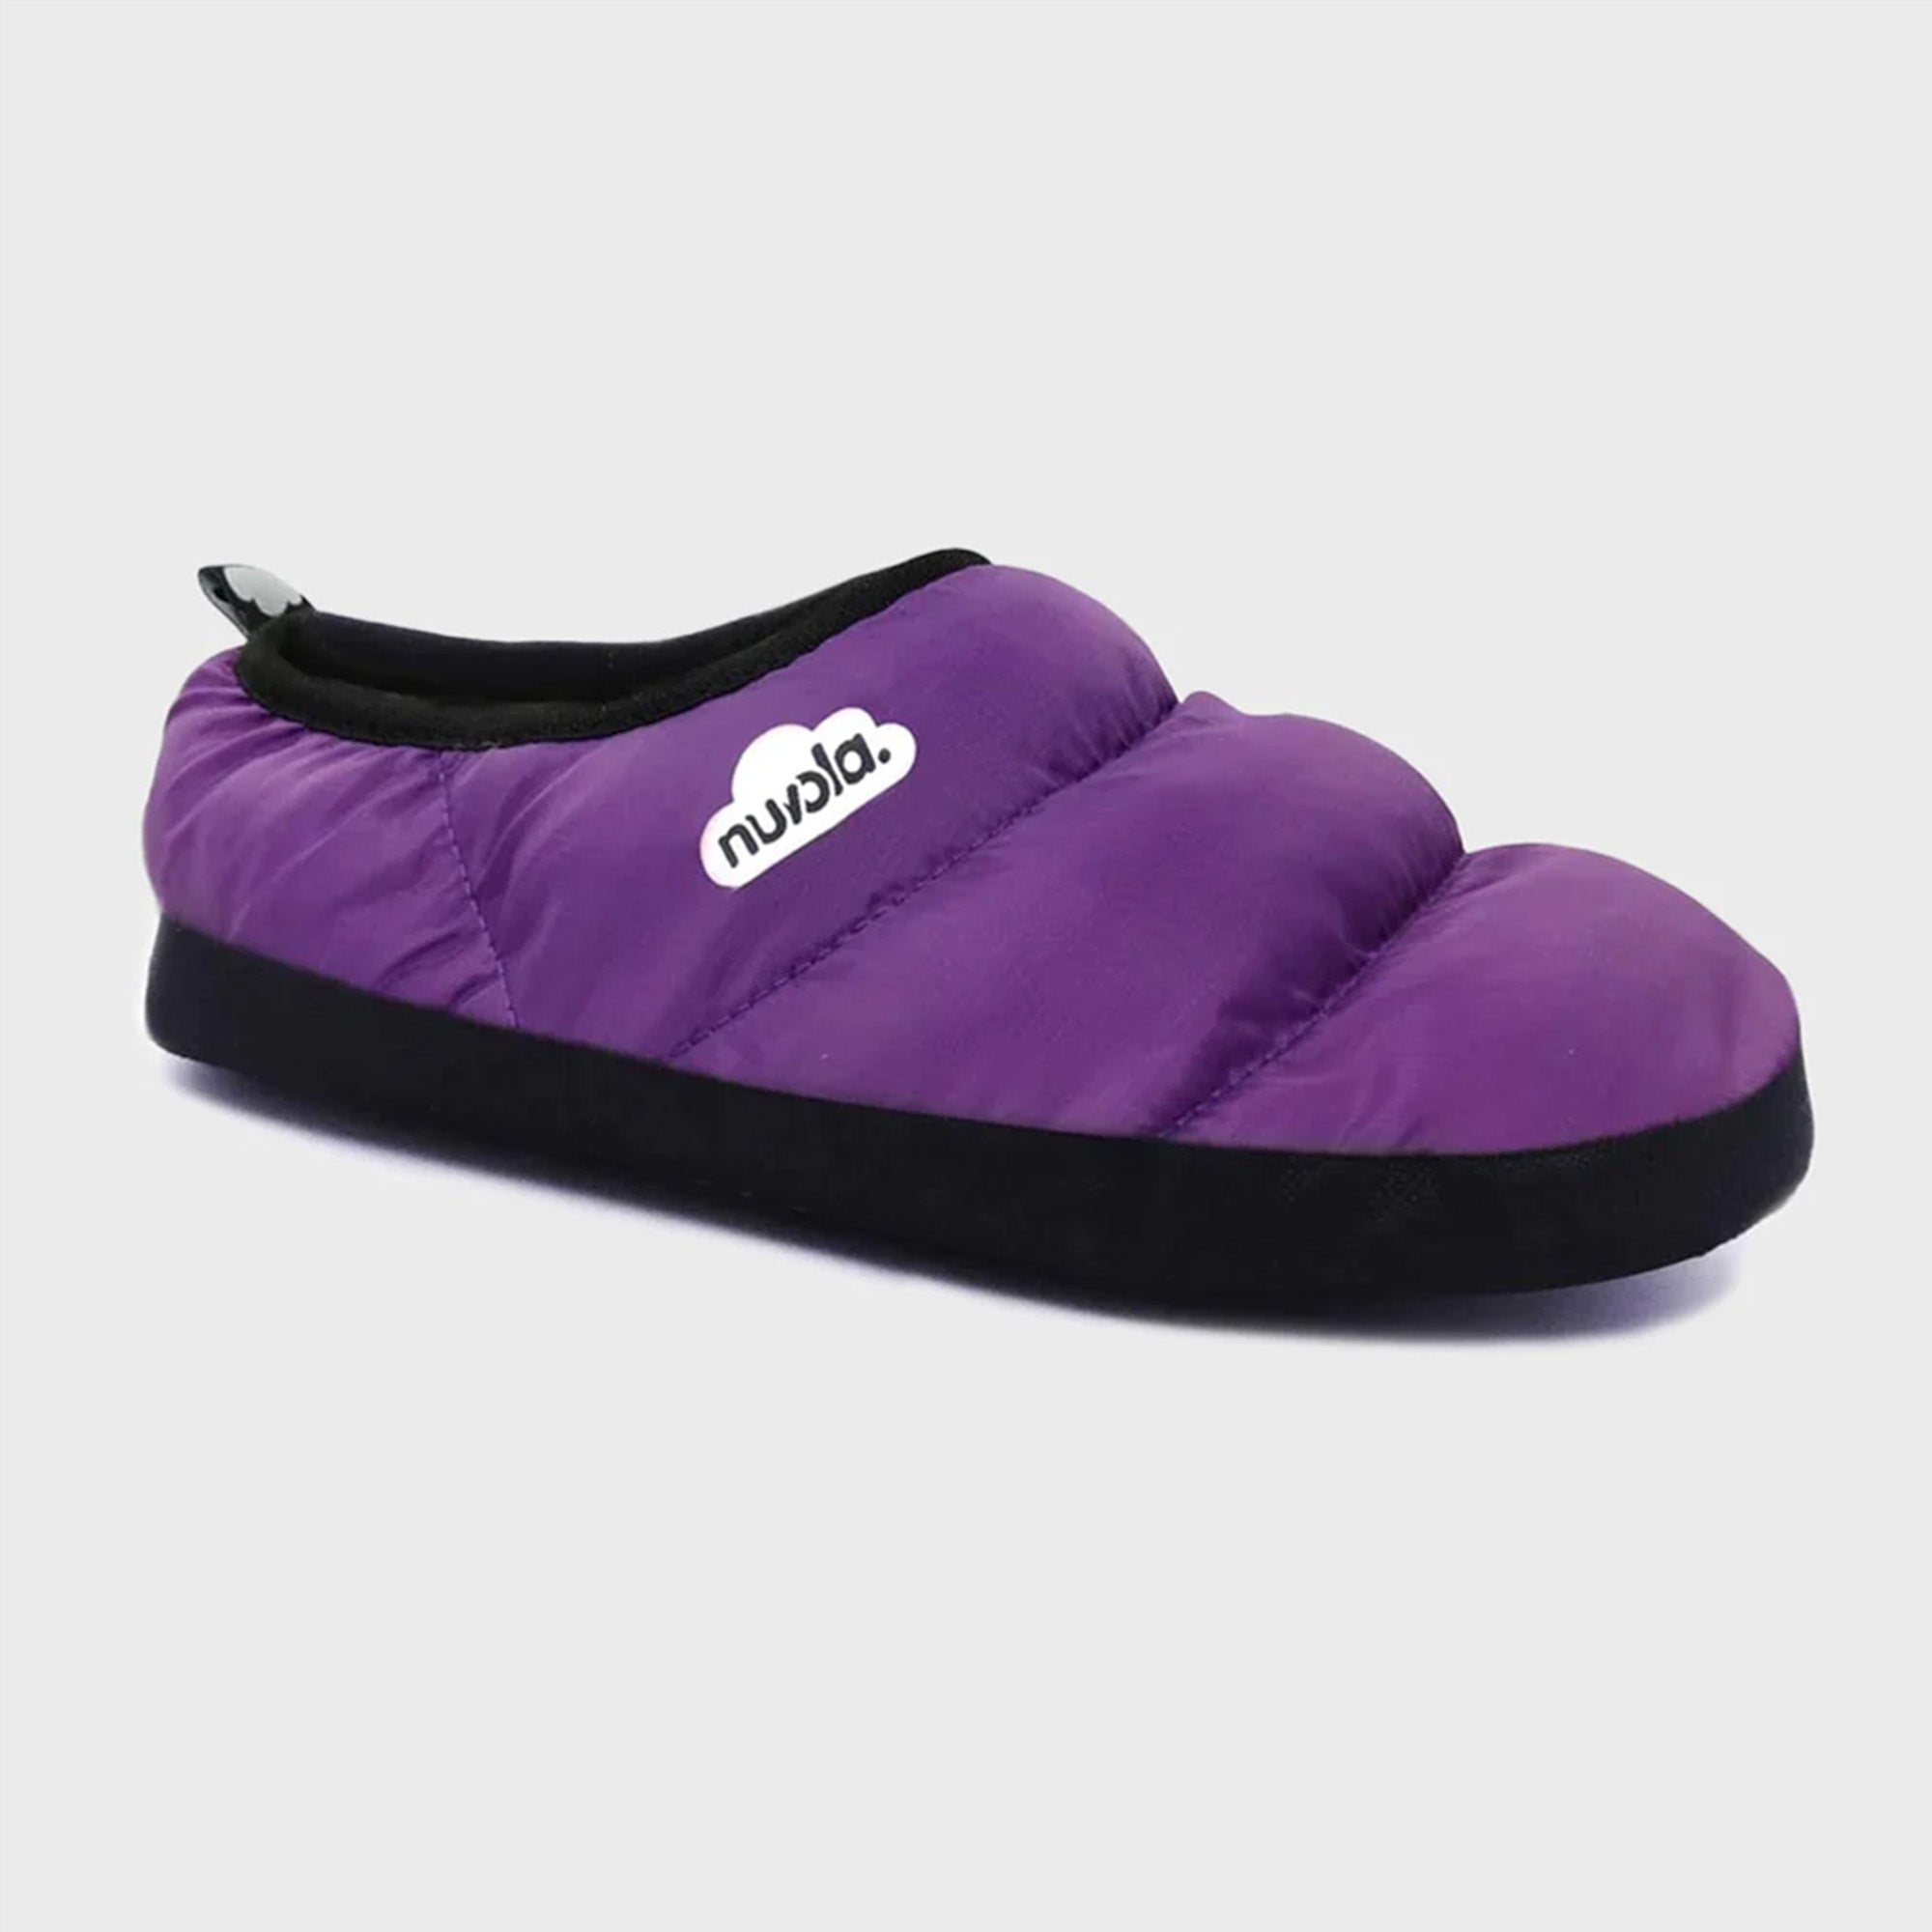 Nuvola Classic Slippers in Purple CNCLAG21 FROM EIGHTYWINGOLD - OFFICIAL BRAND PARTNER